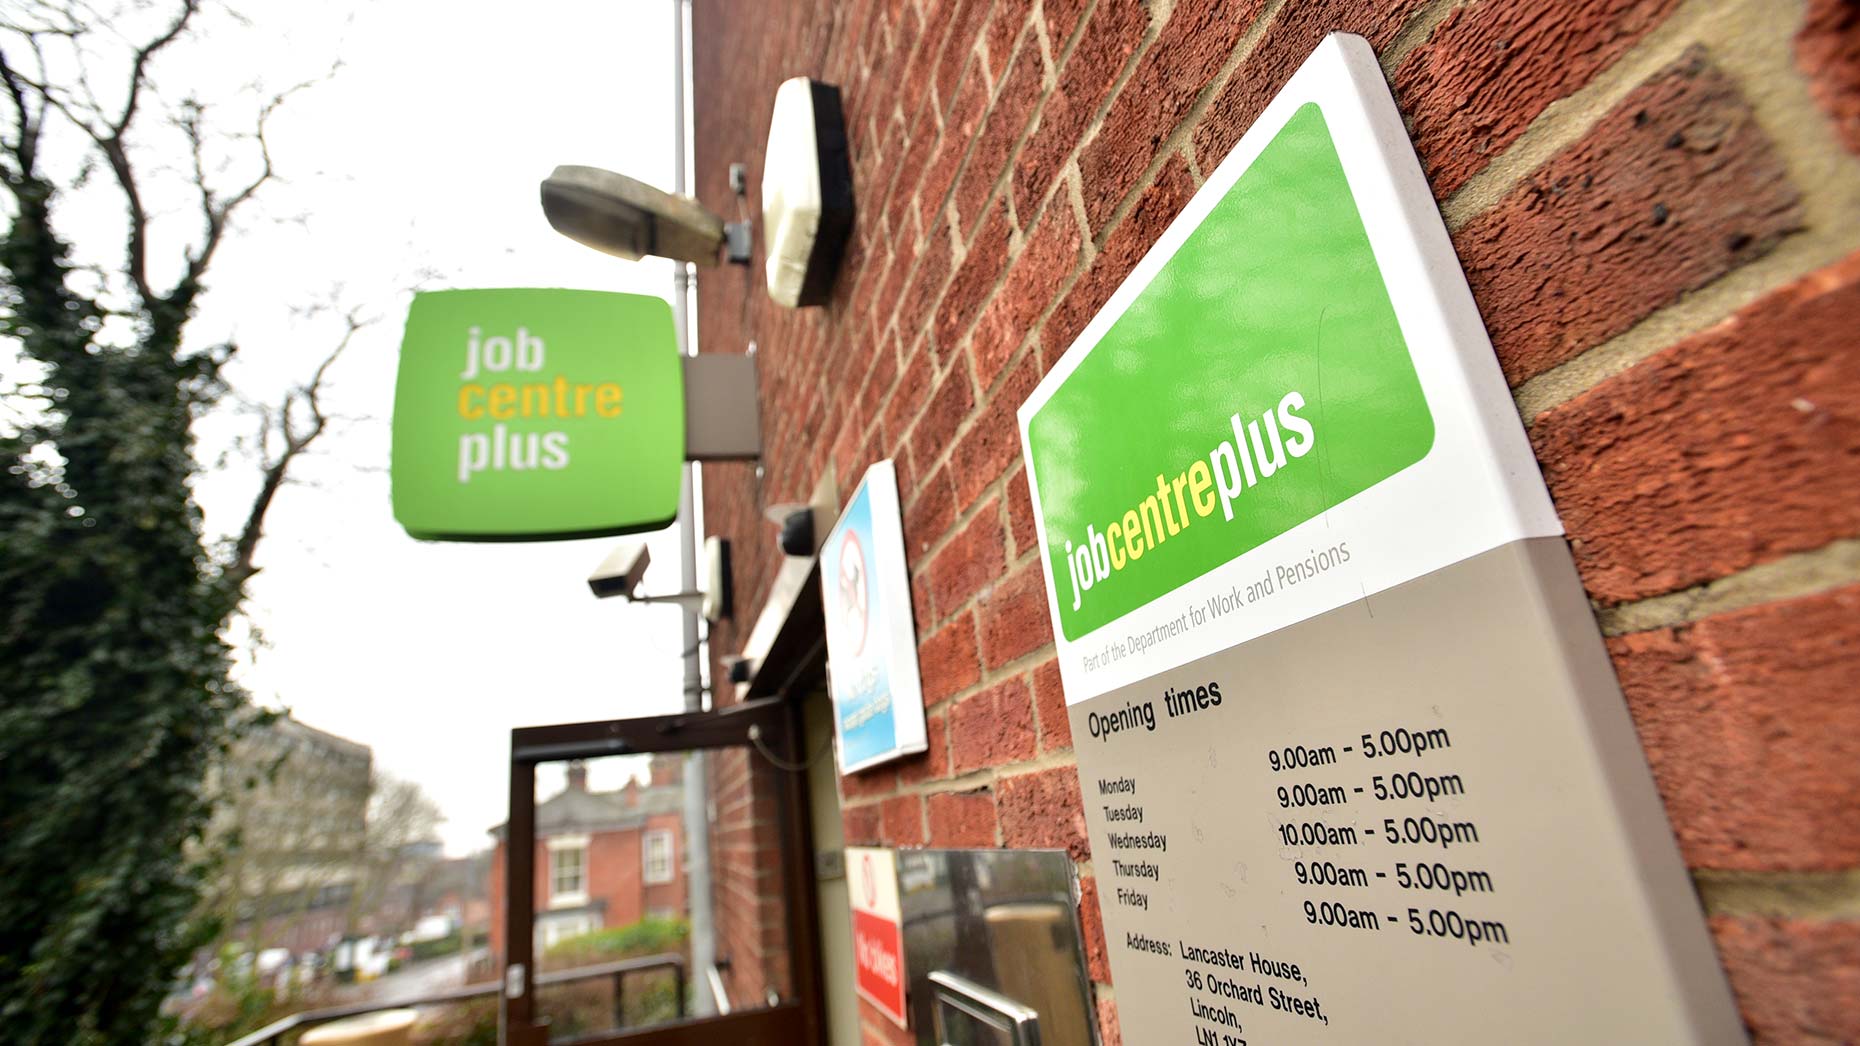 Lincoln Jobcentre on Orchard Street. Photo Steve Smailes for The Lincolnite